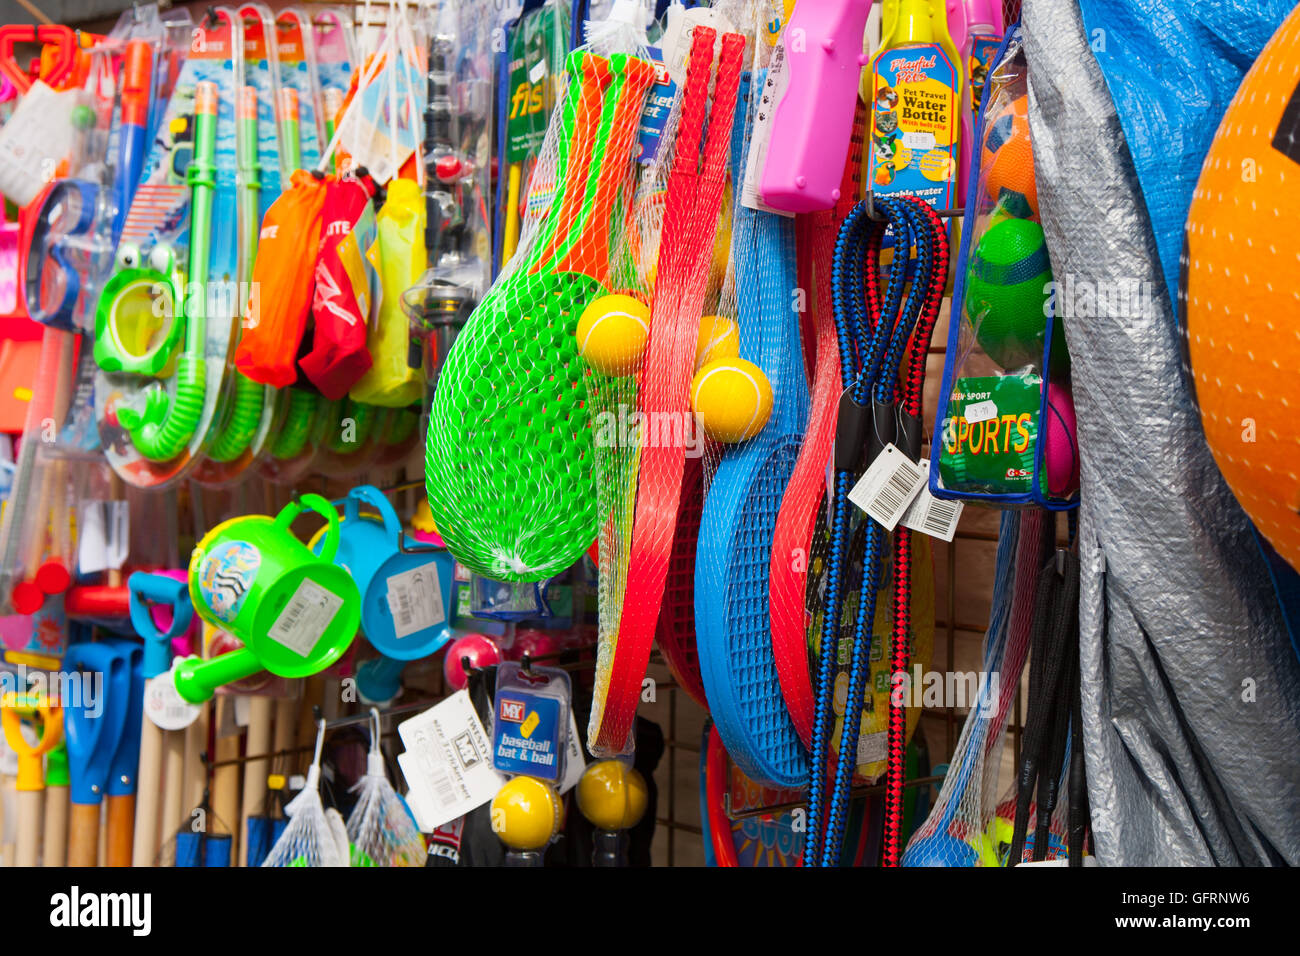 Beach goods for sale in Cornwall, England Stock Photo